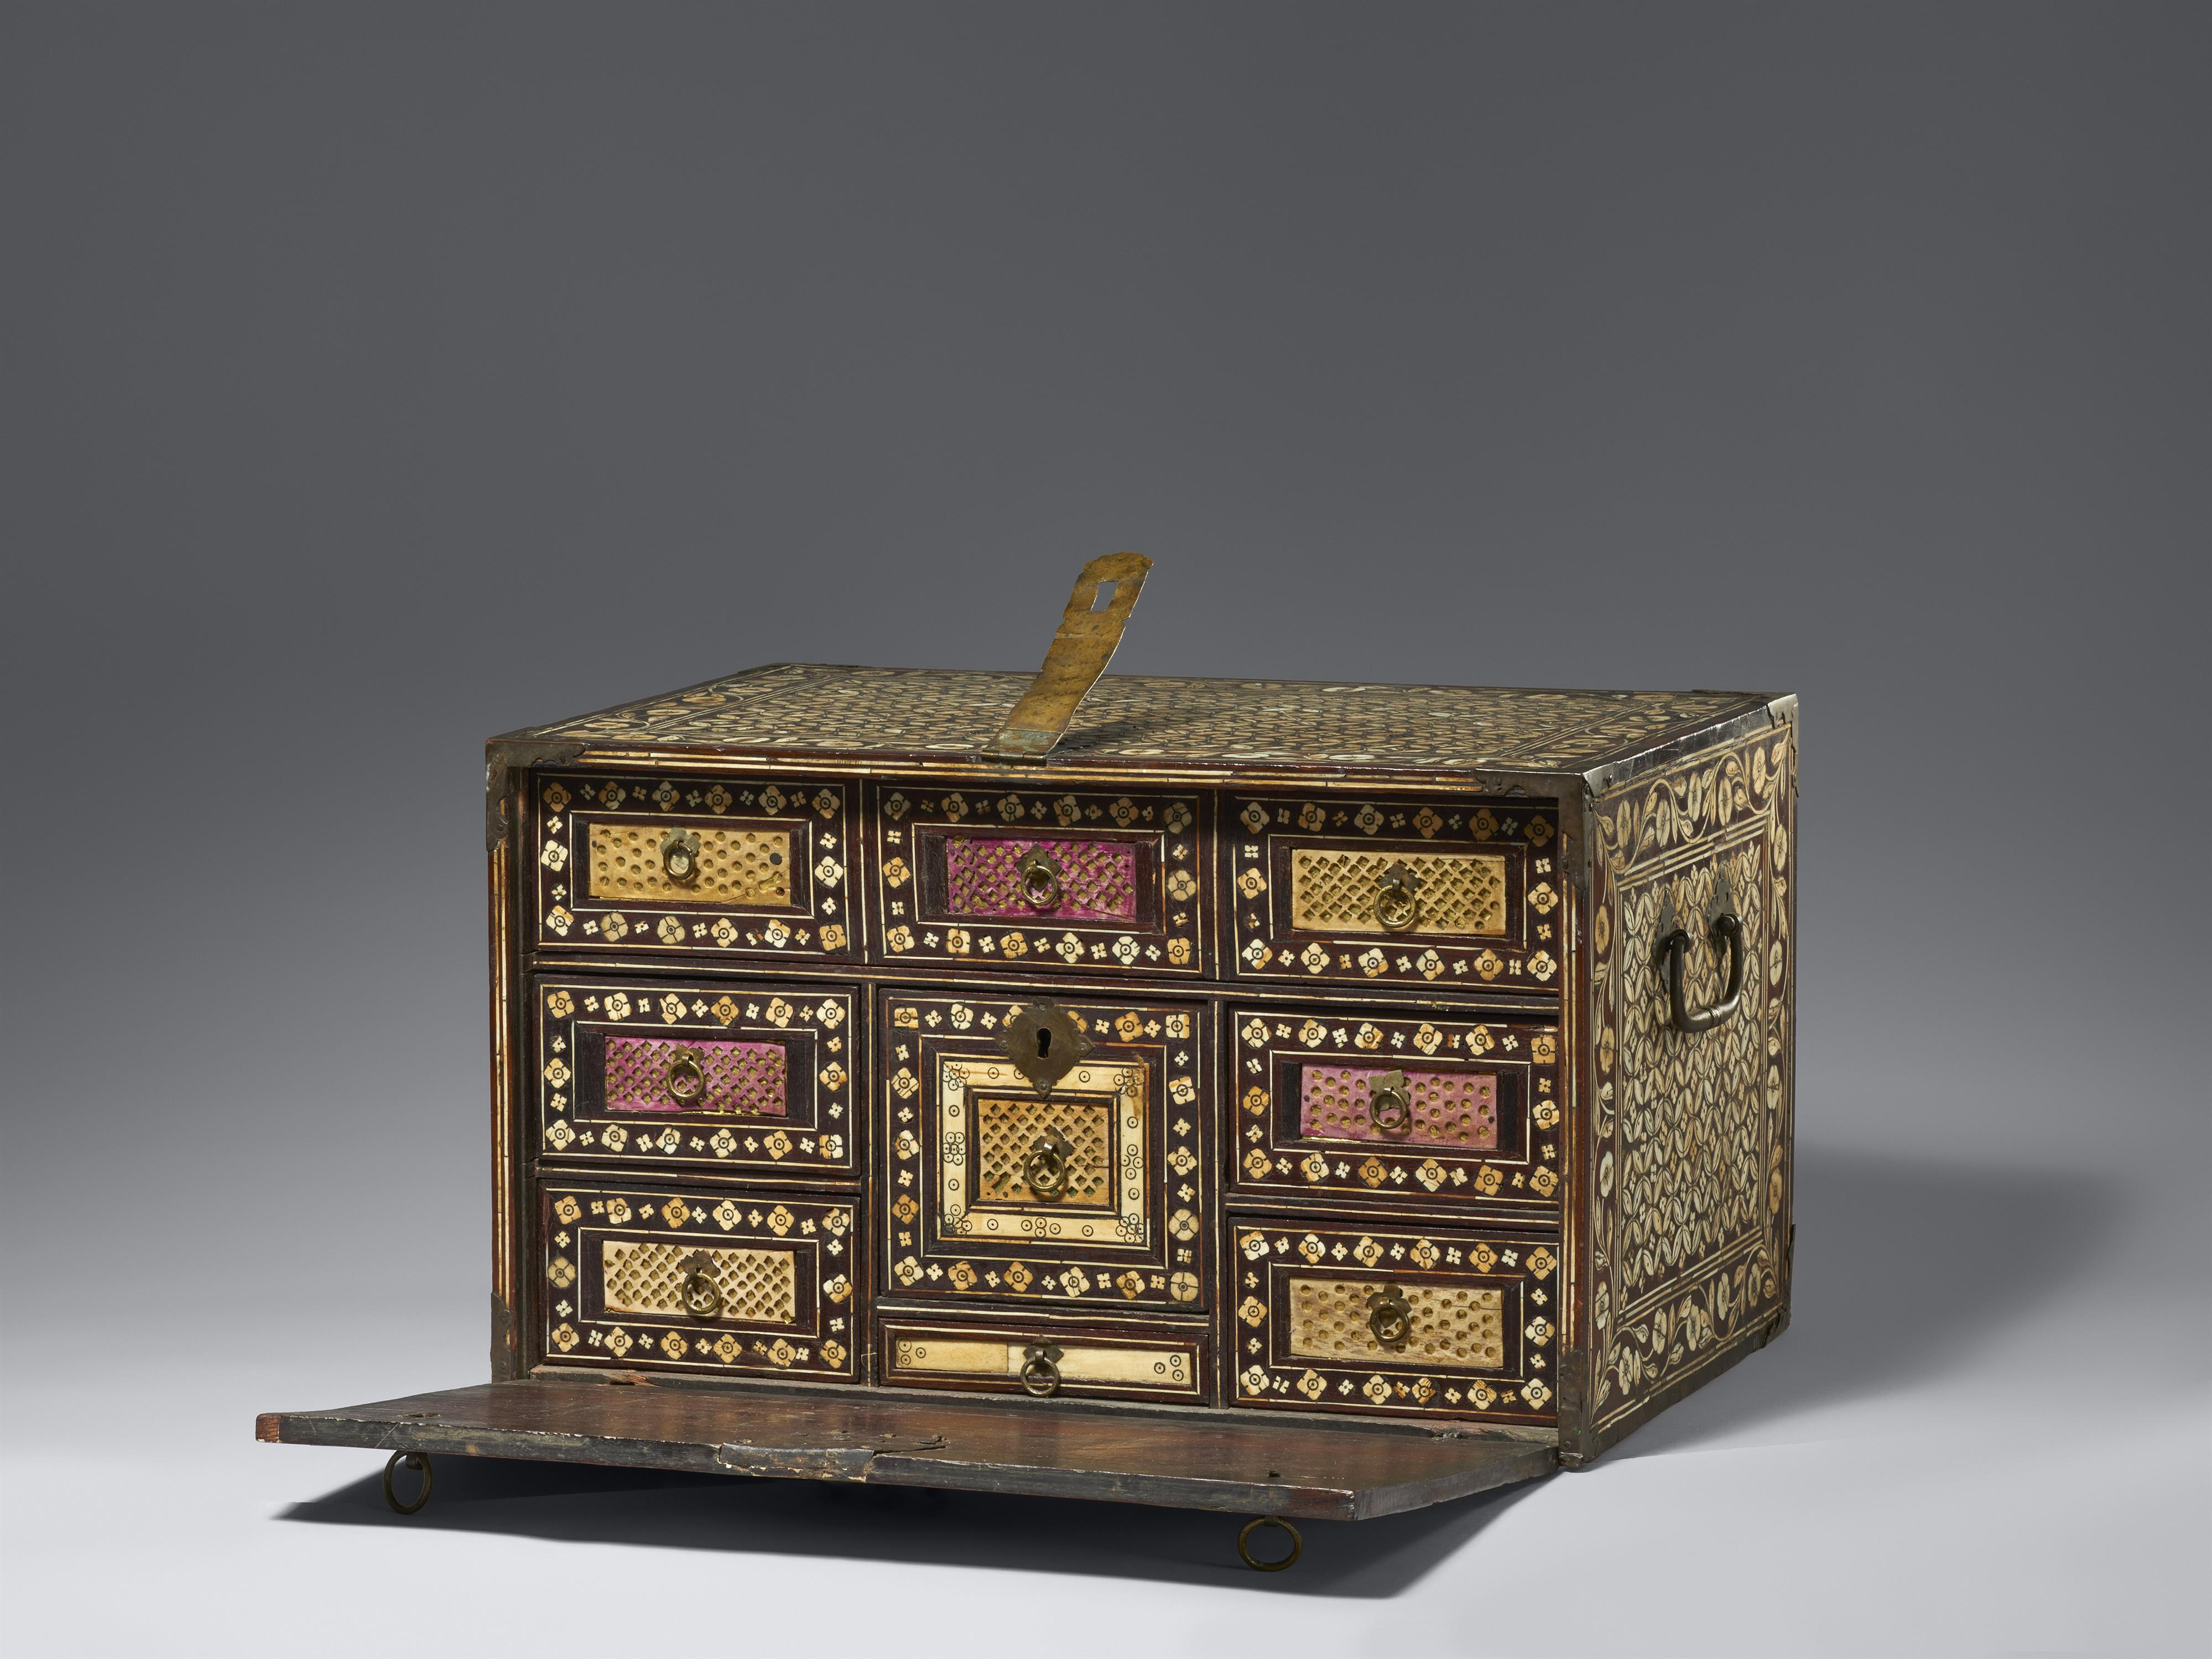 A Mughal ivory-inlaid wooden chest. Northwest-India/Pakistan, Gujarat or Sindh. 17th century - image-1